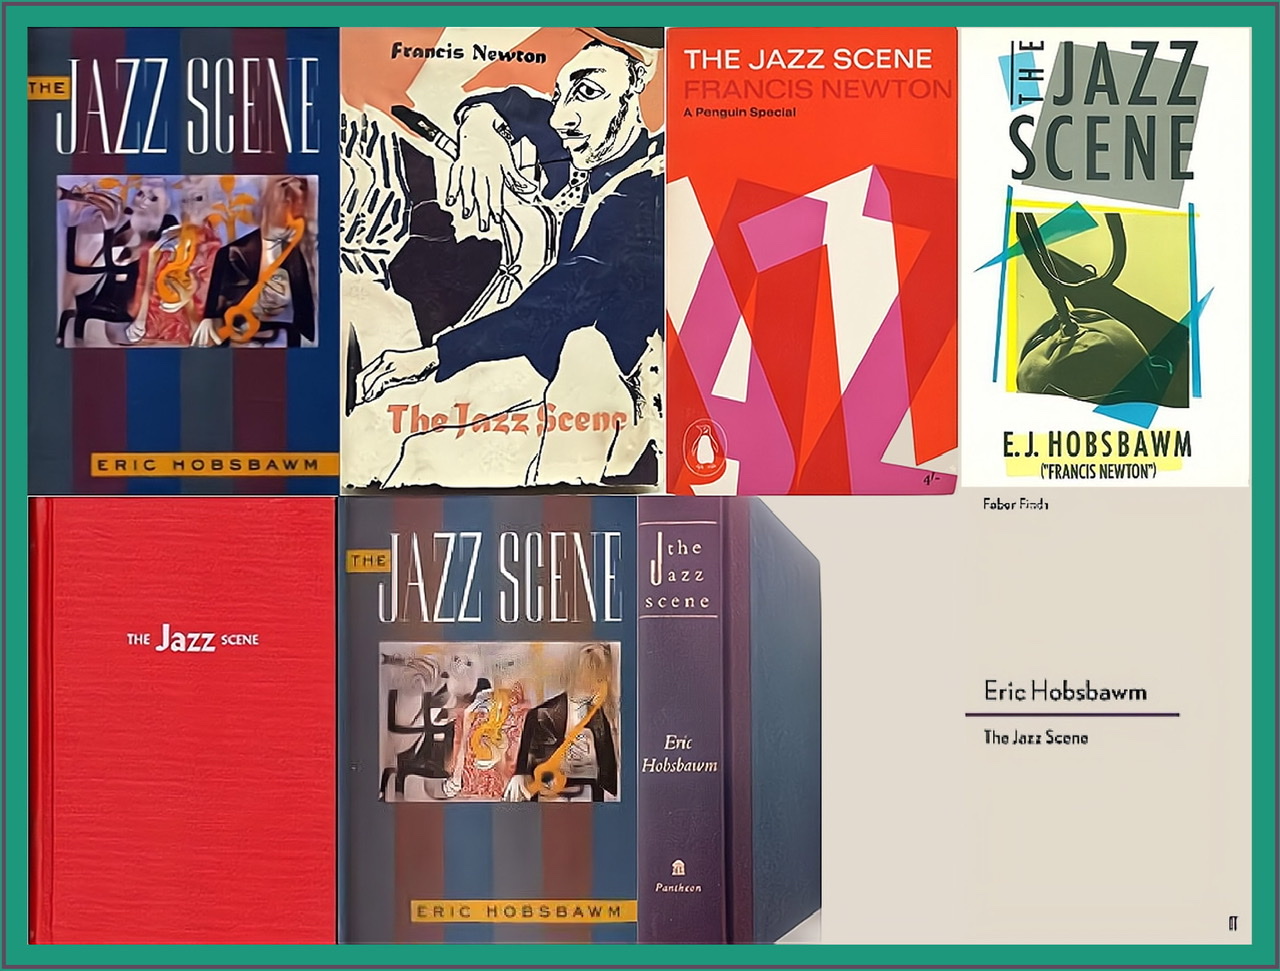 A green framed composite of eight different book covers of The Jazz Scene (1959) by Eric Hobsbawm.